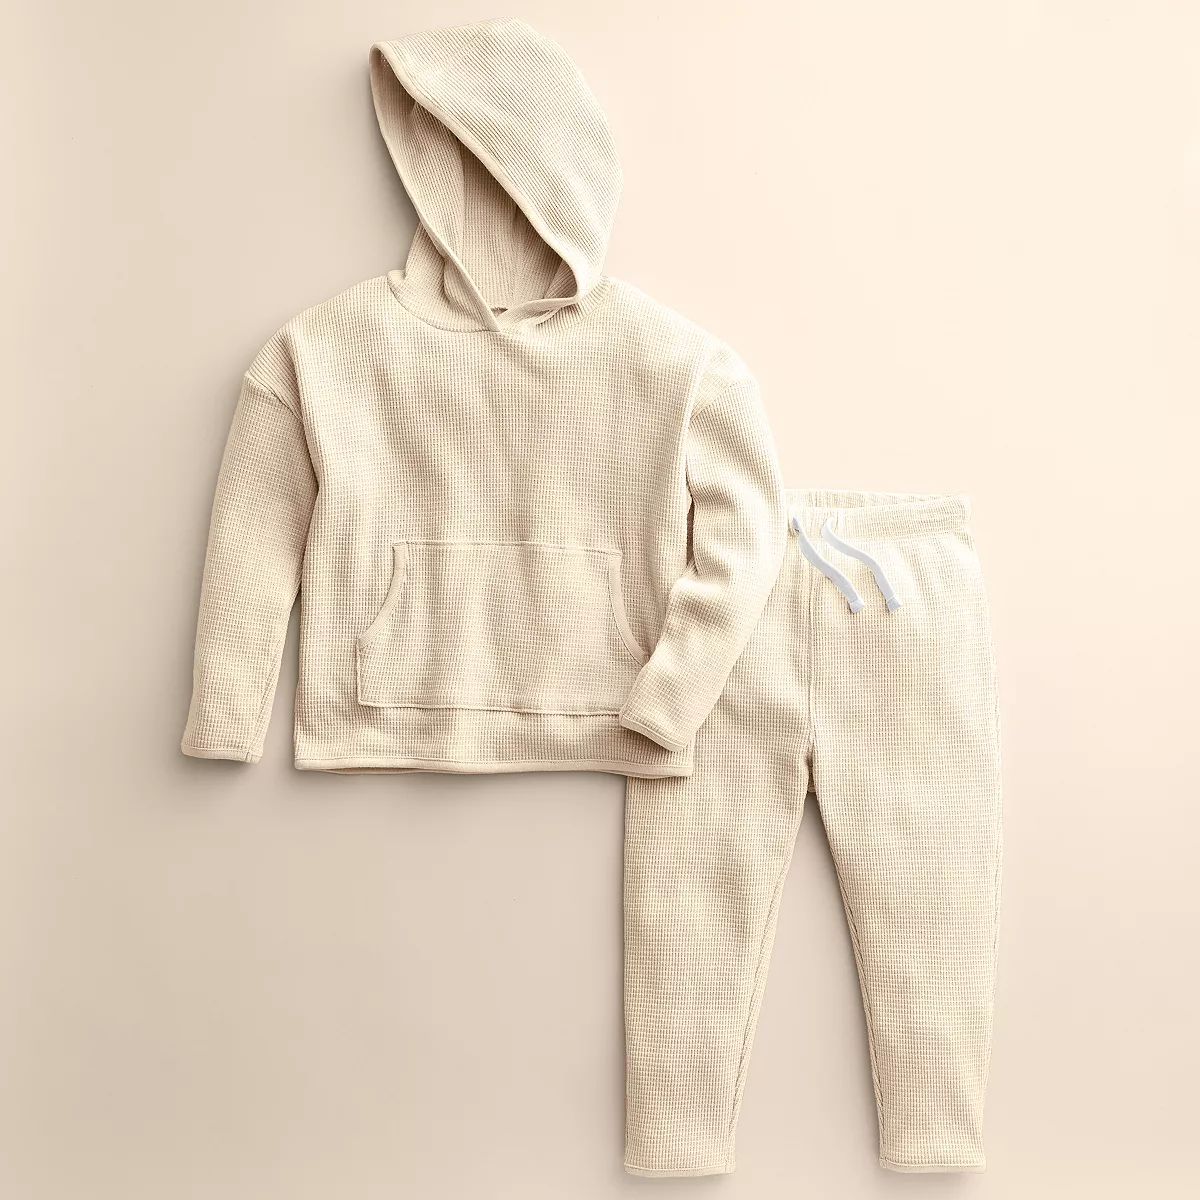 Baby & Toddler Little Co. by Lauren Conrad Cozy Pullover & Pants Set | Kohl's